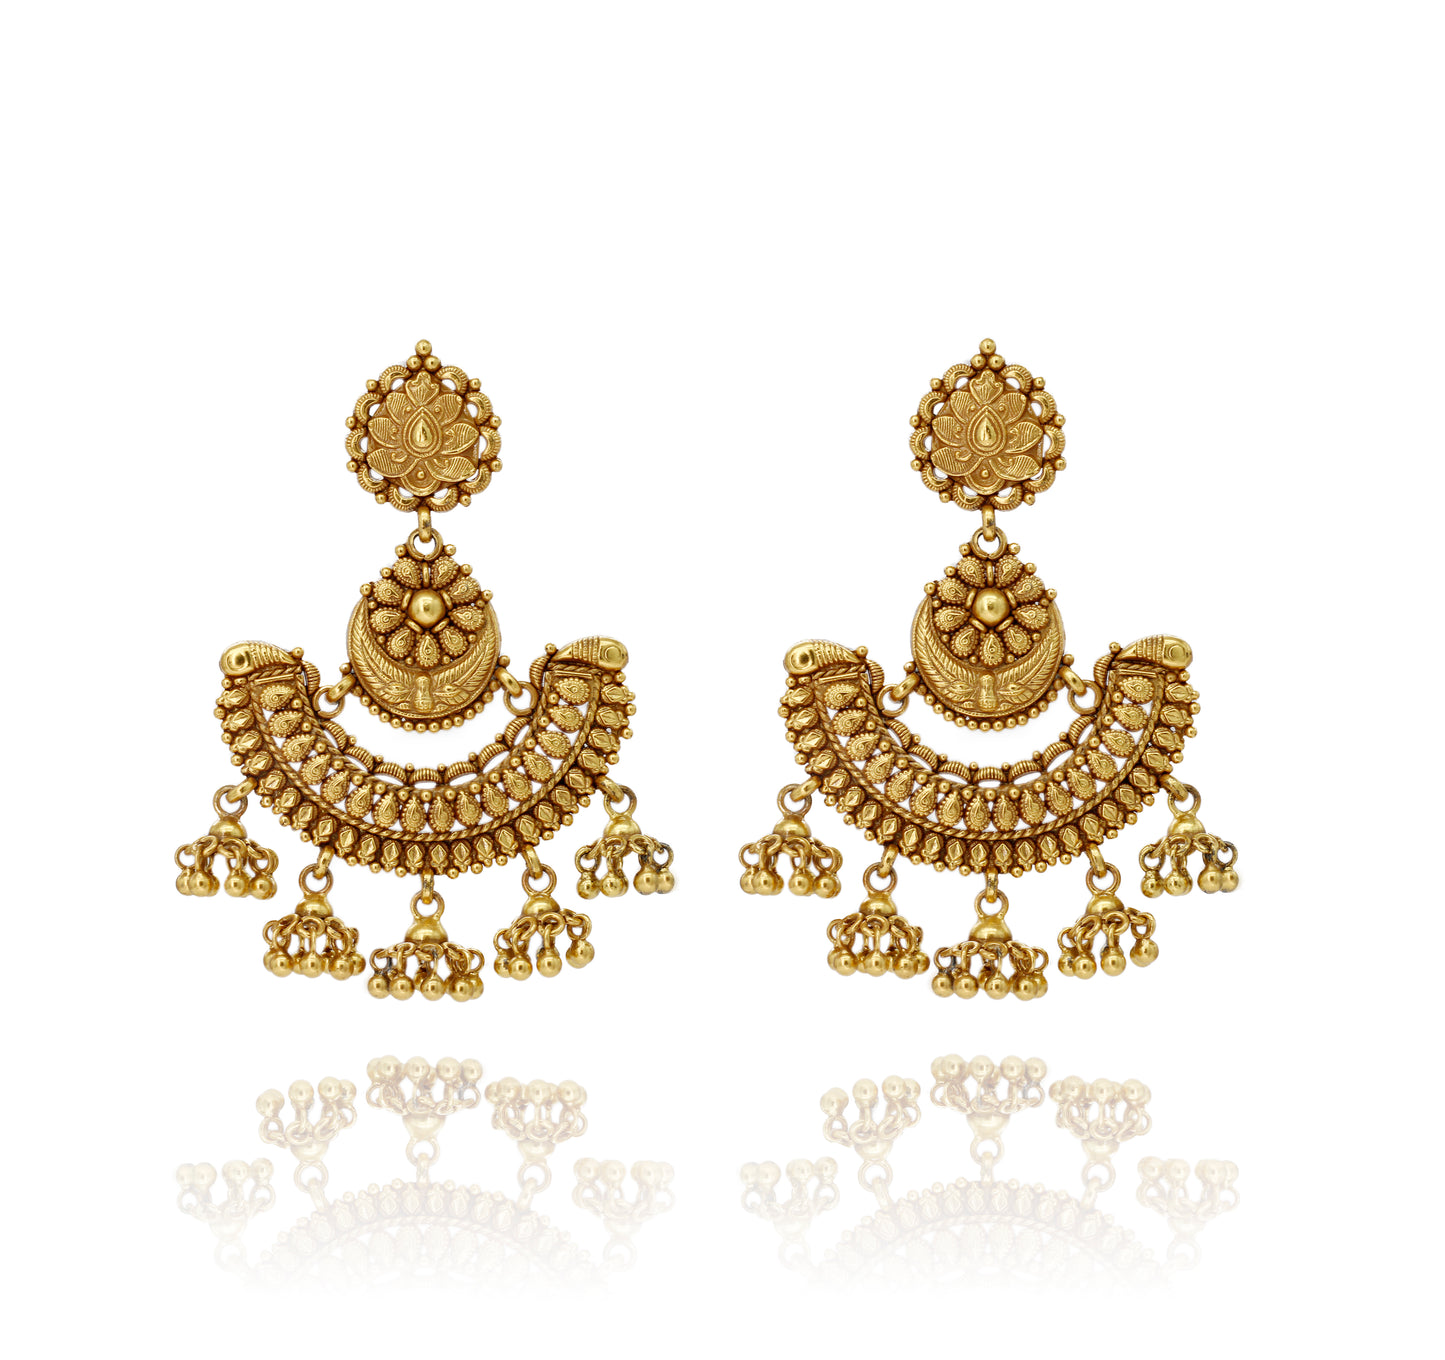 EARRINGS- 92.5 STERLING SILVER GOLD PLATED WITH SILVER BEADS.